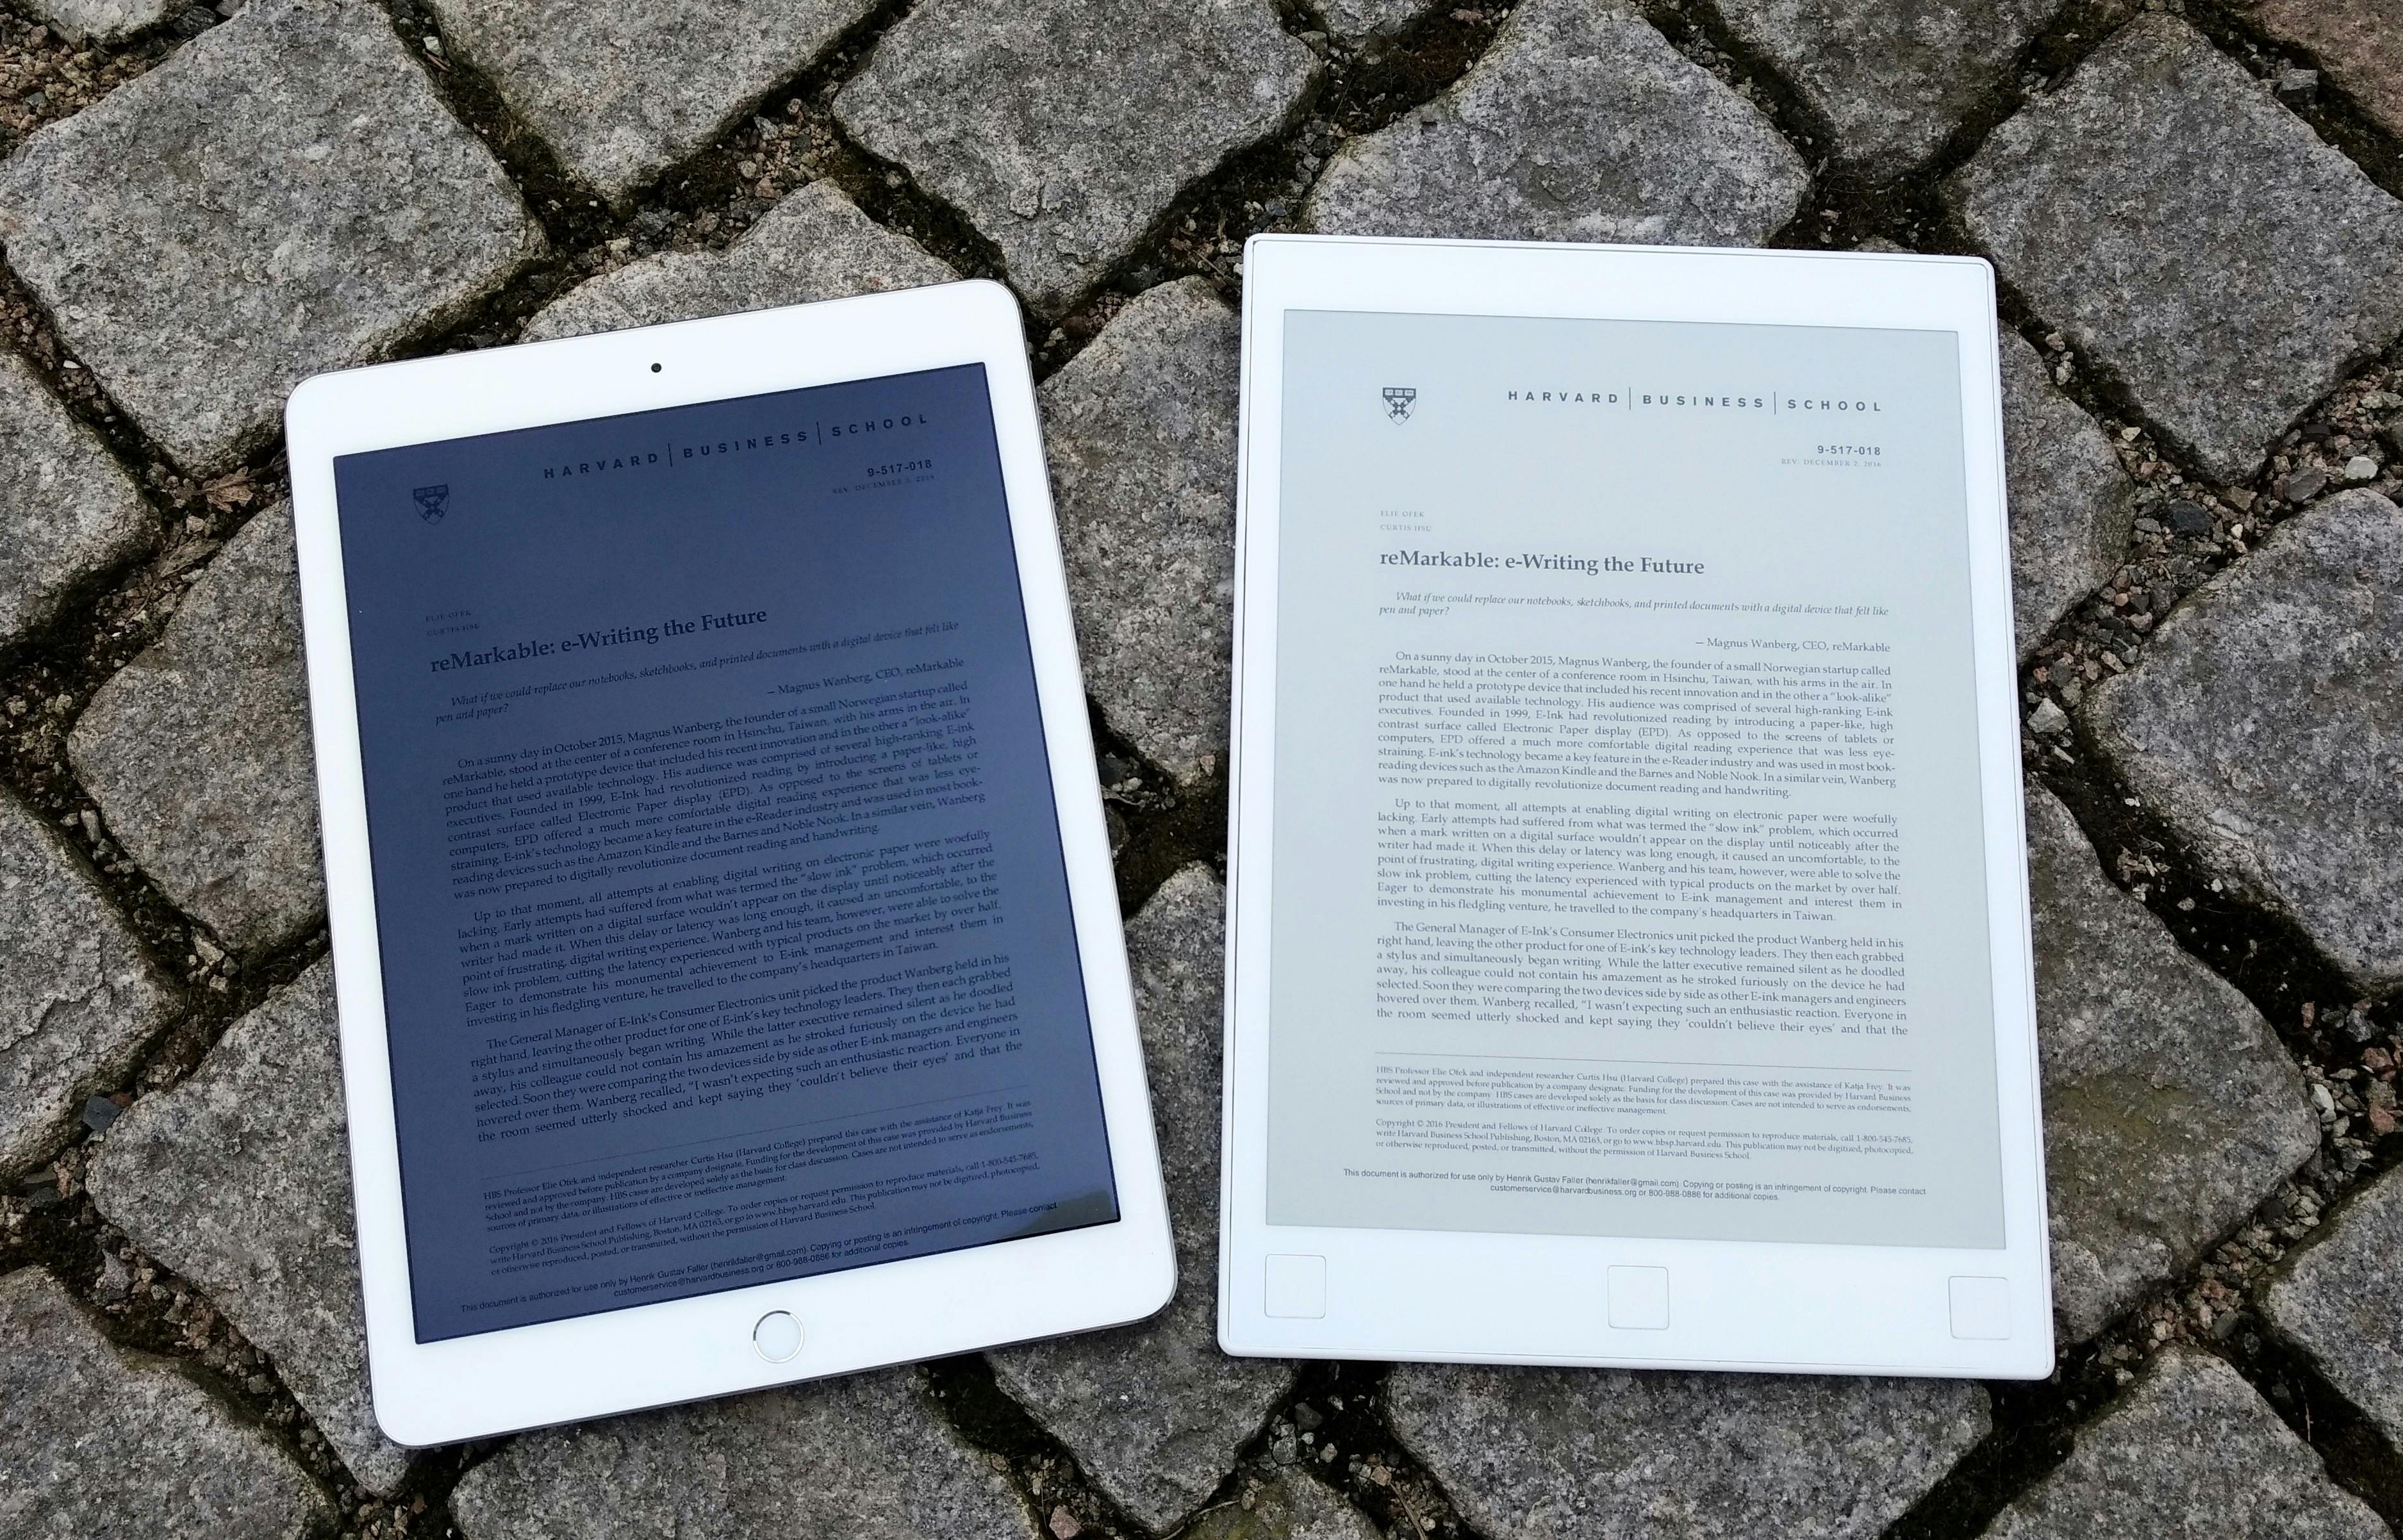 Is a reMarkable tablet better than an iPad?